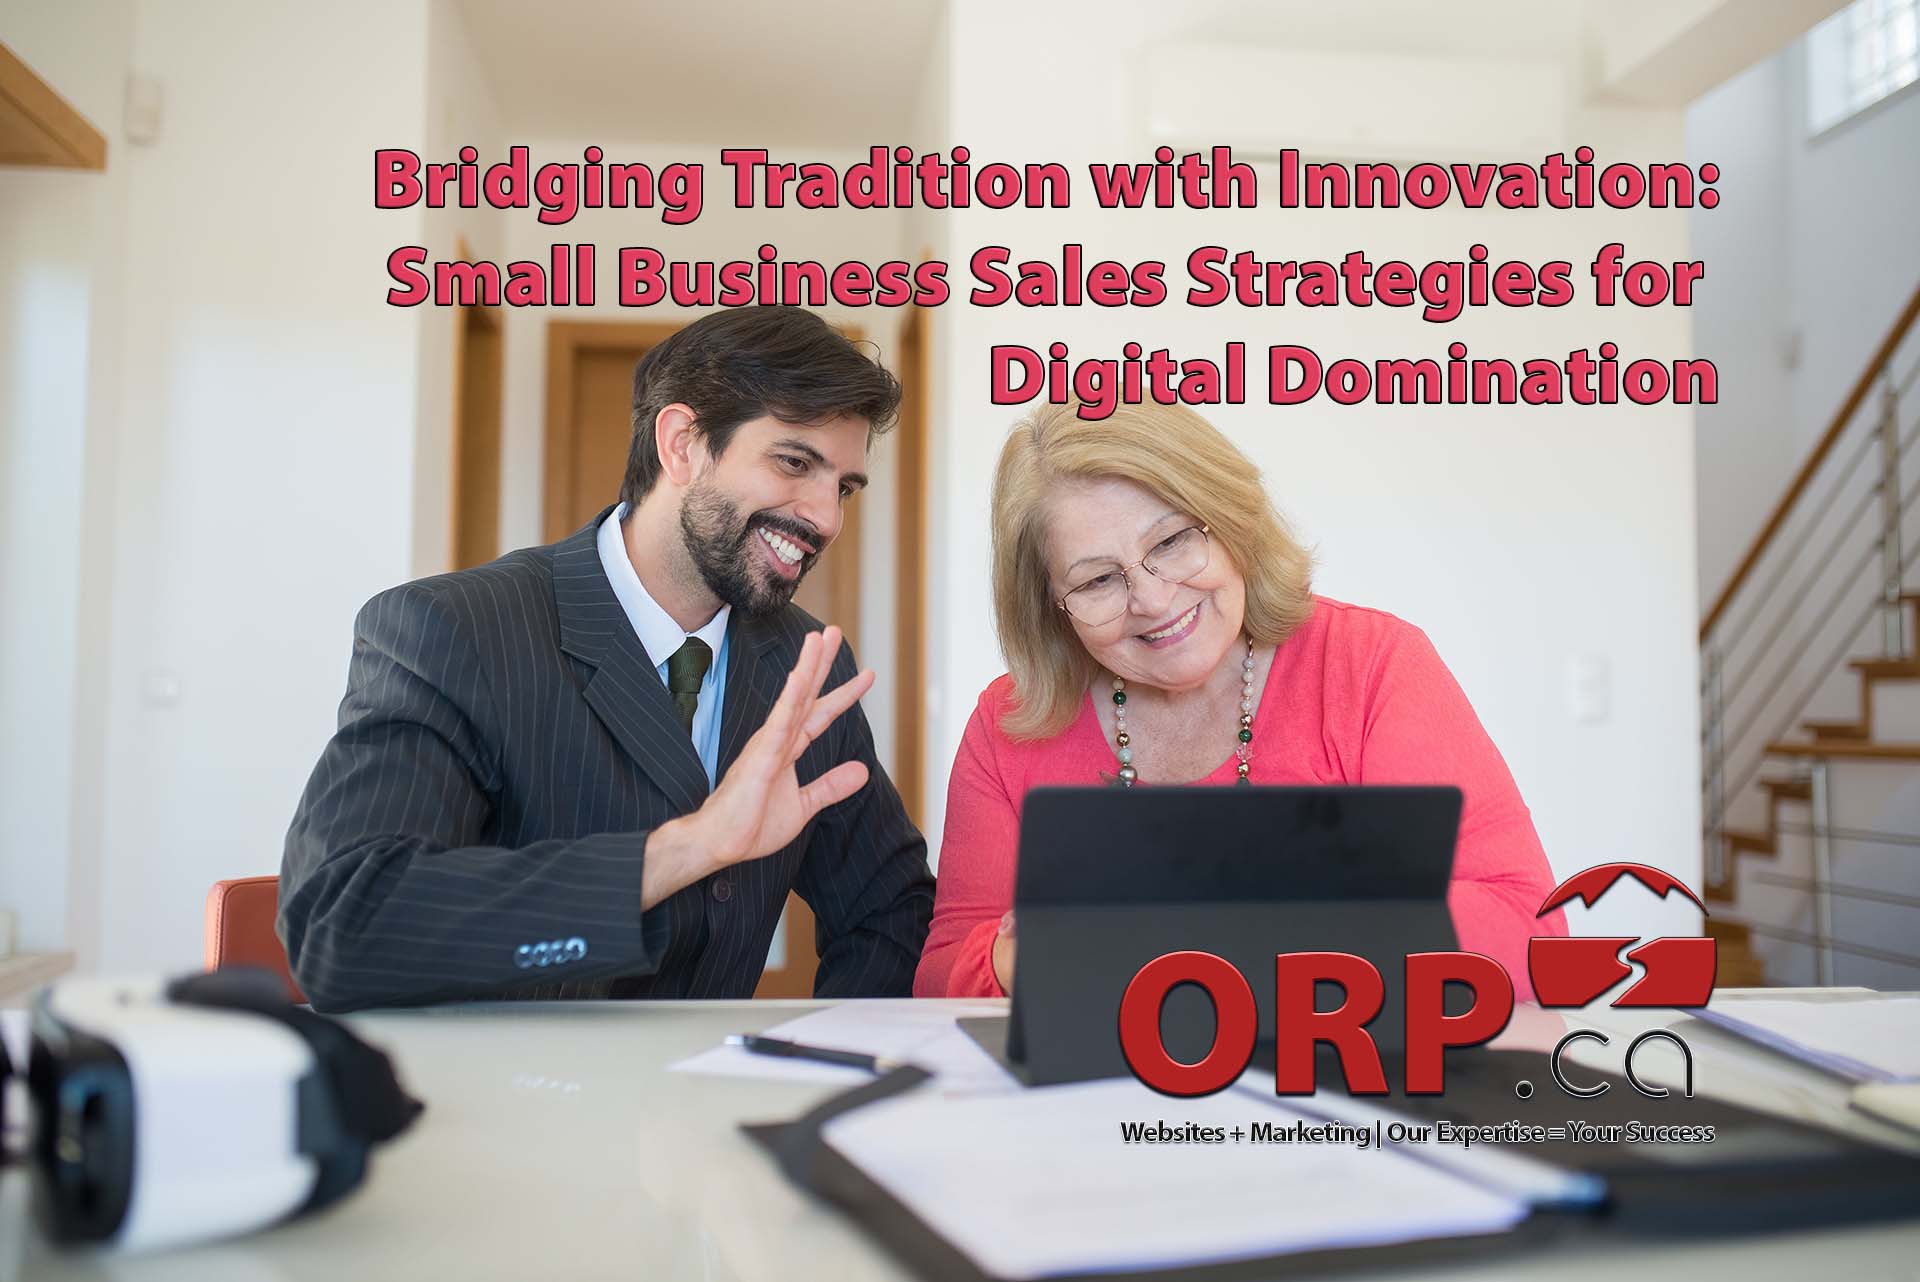 Bridging Tradition with Innovation Small Business Sales Strategies for Digital Domination a small business digital marketing article from ORP.ca - Website design and support, digital marketing and consulting services.